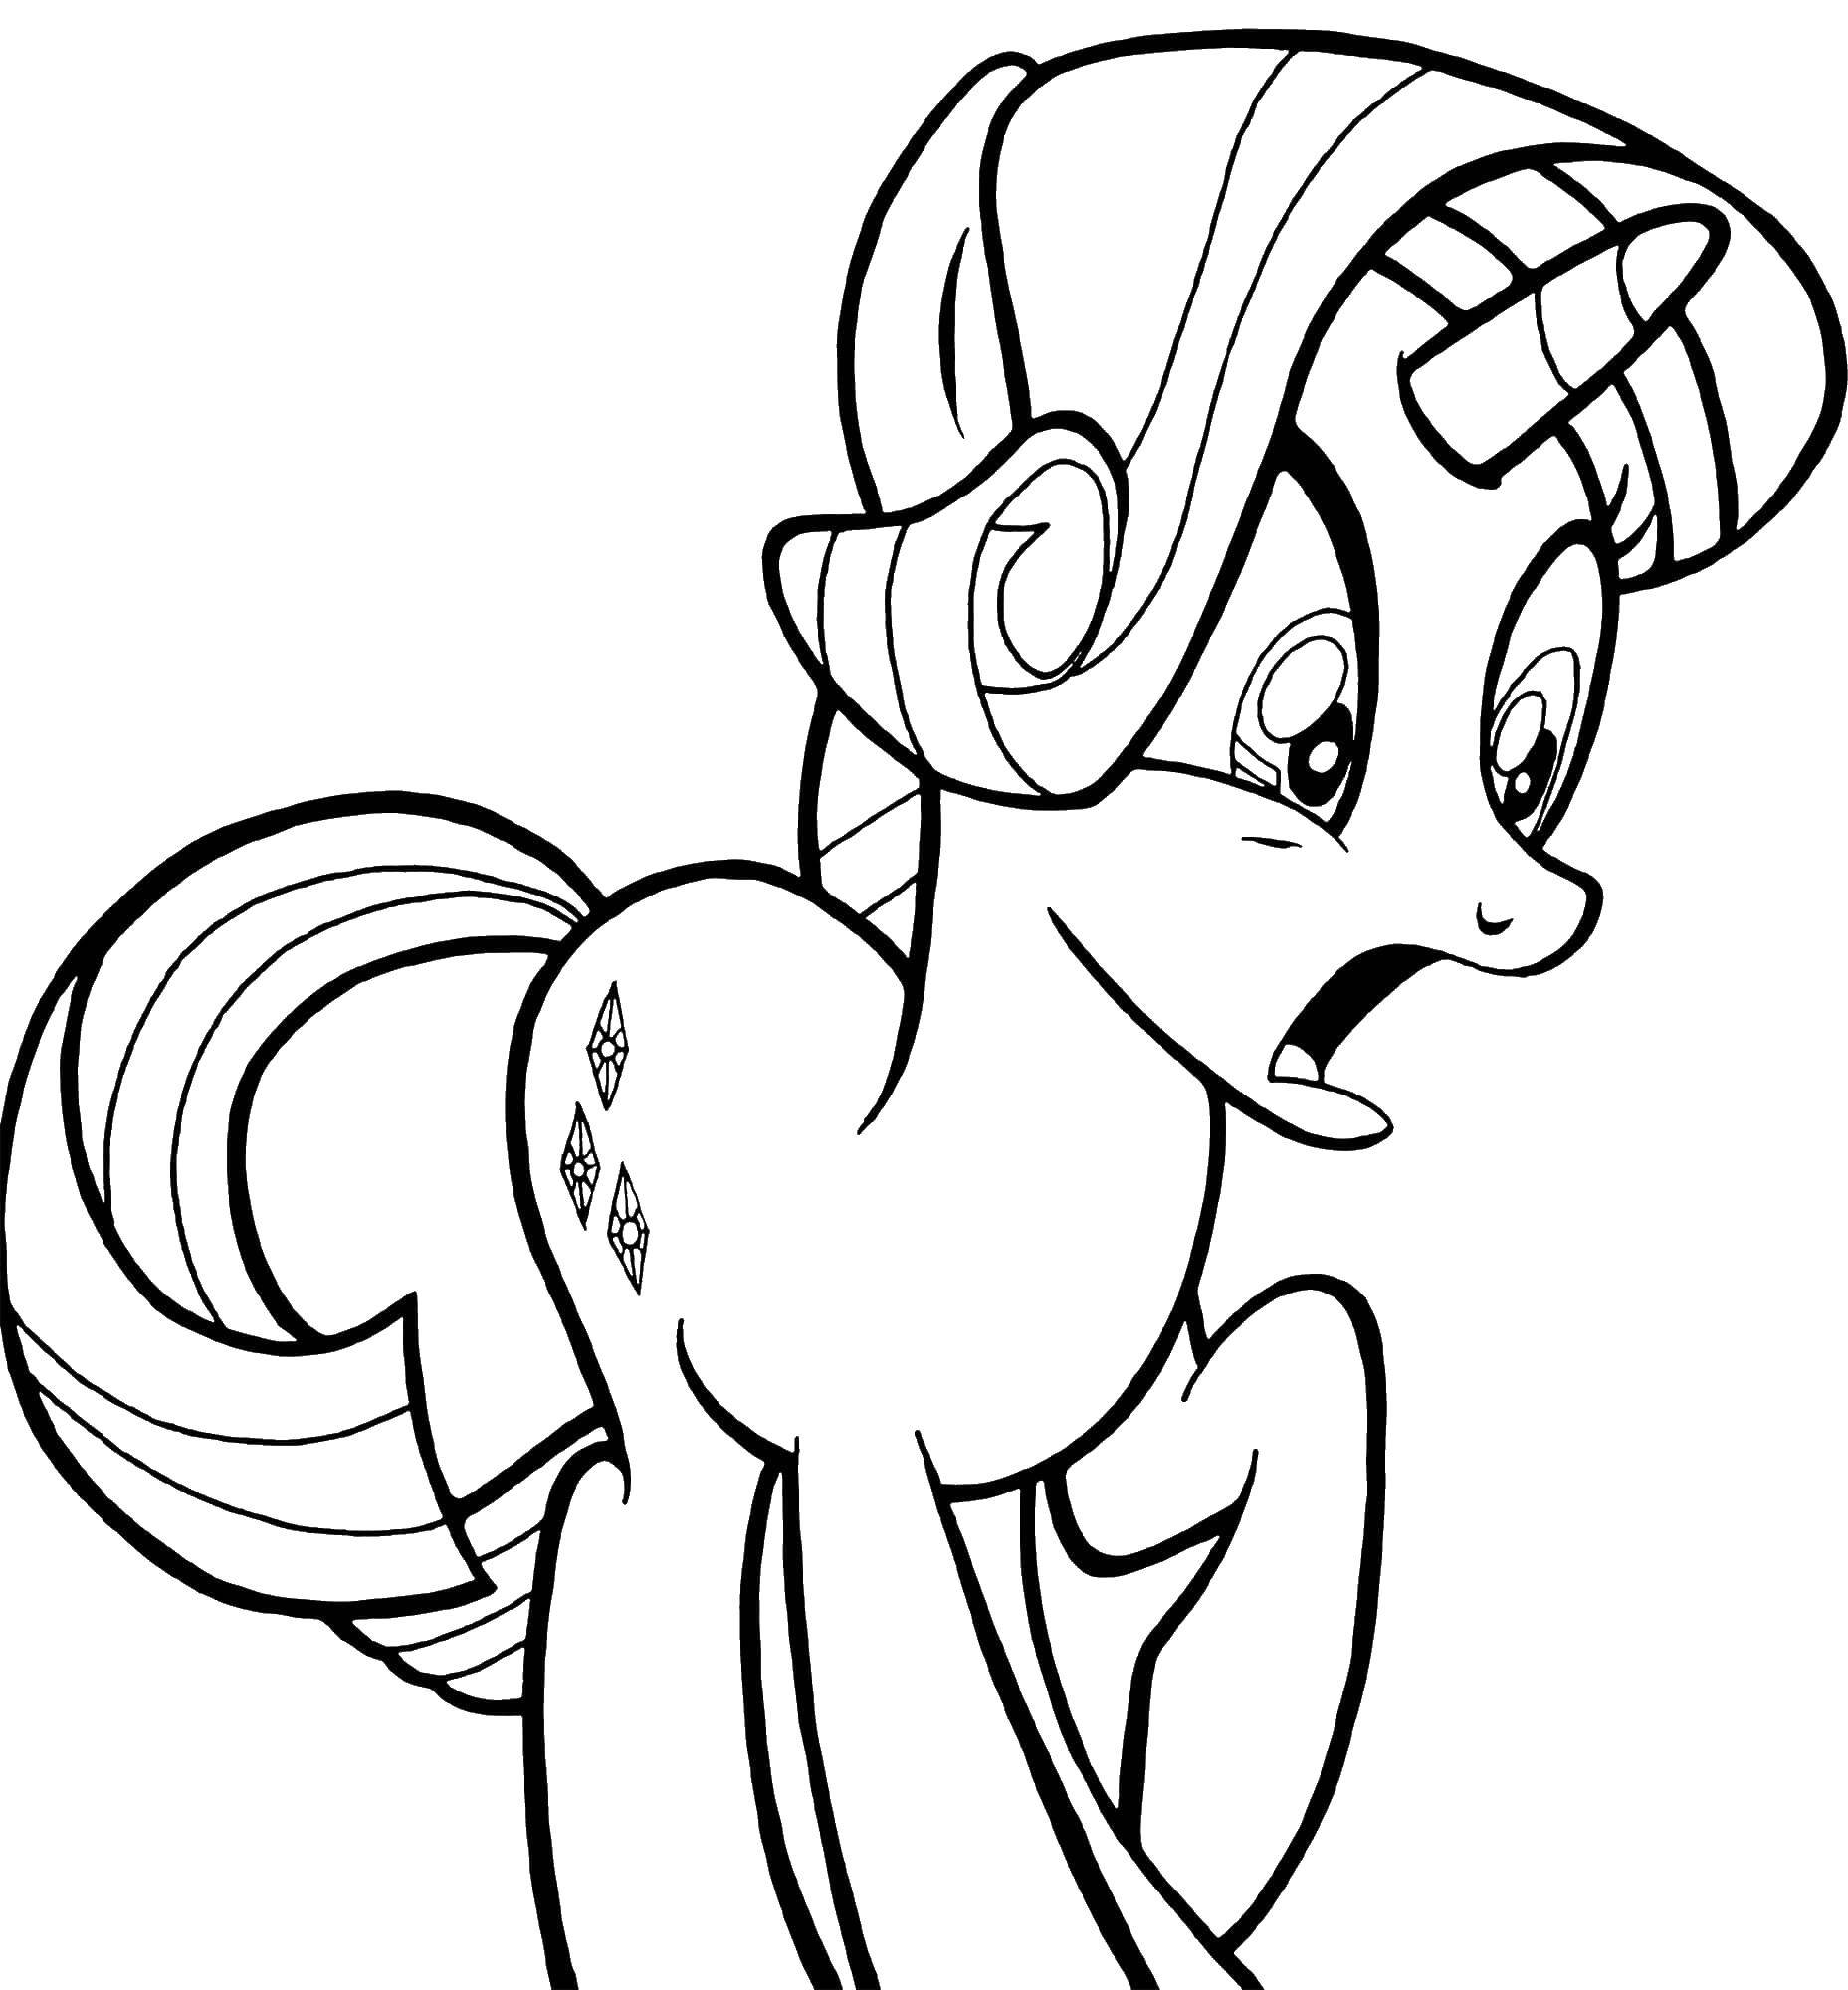 Coloring Rarity. Category my little pony. Tags:  rarity, pony.